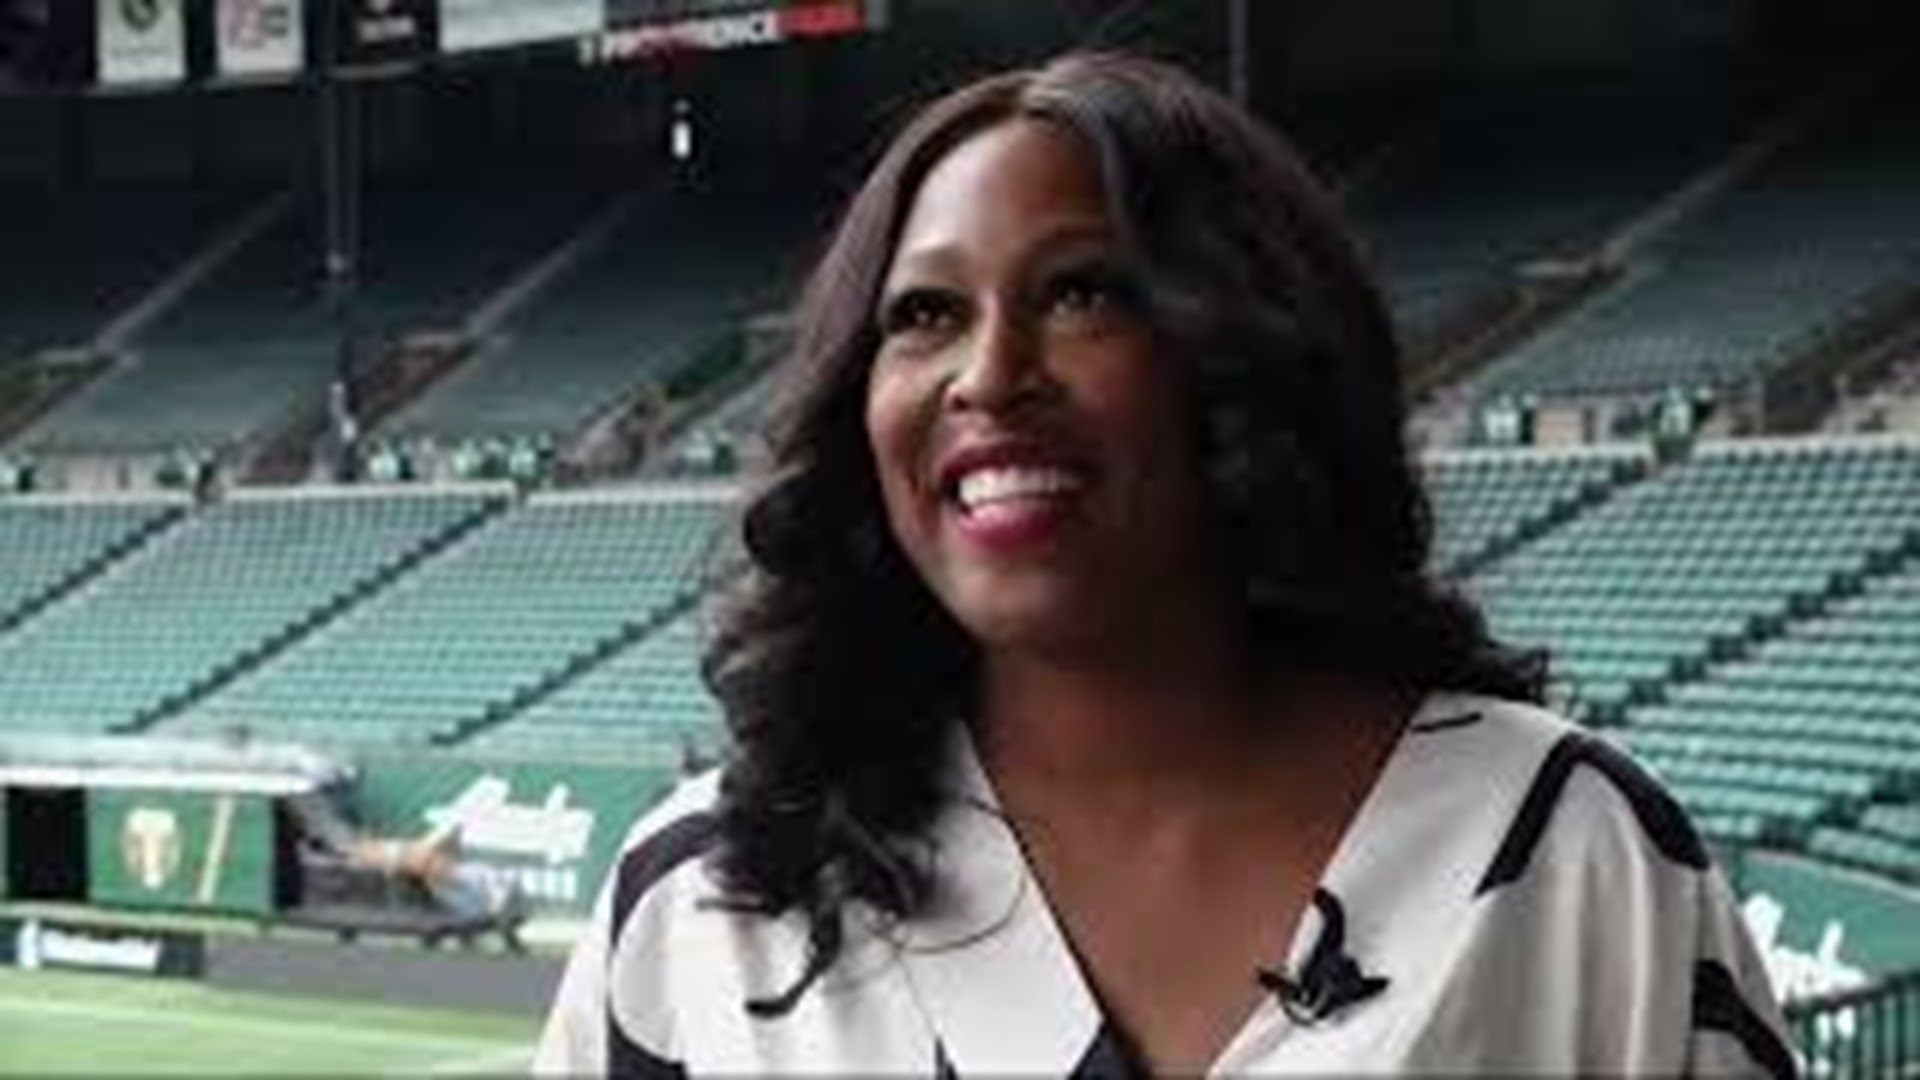 The Portland Thorns partnered with KeyBank for the 'Women-Owned Business Pitch Contest." The owner of a Portland hair salon won the contest and received $20,000.